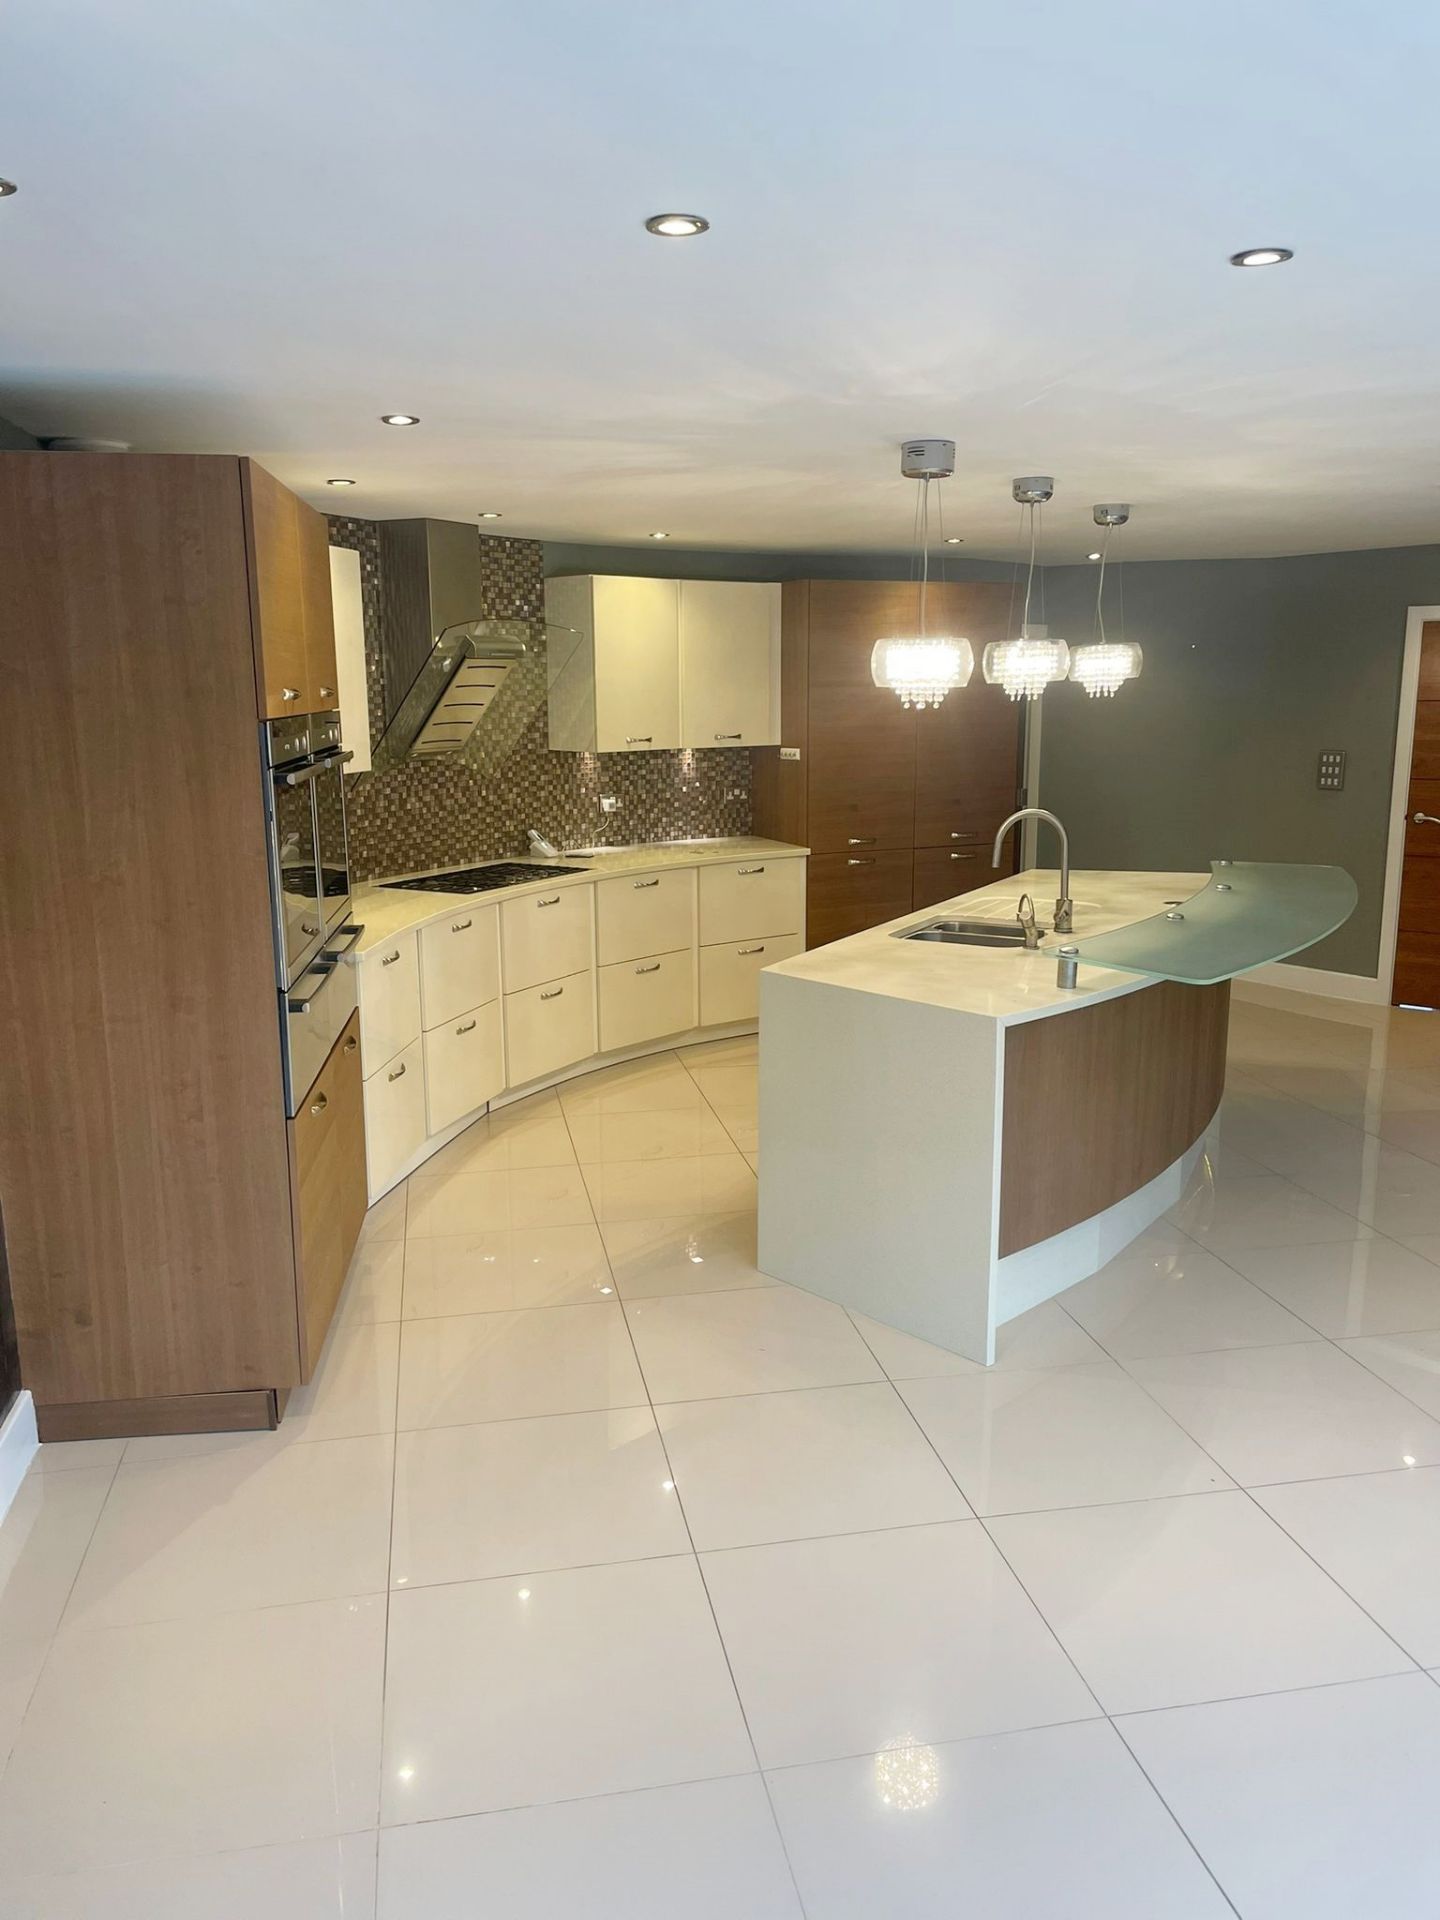 1 x Contemporary ALNO Fitted Kitchen With Branded  Appliances Created By Award Winning Kitchen - Image 28 of 89